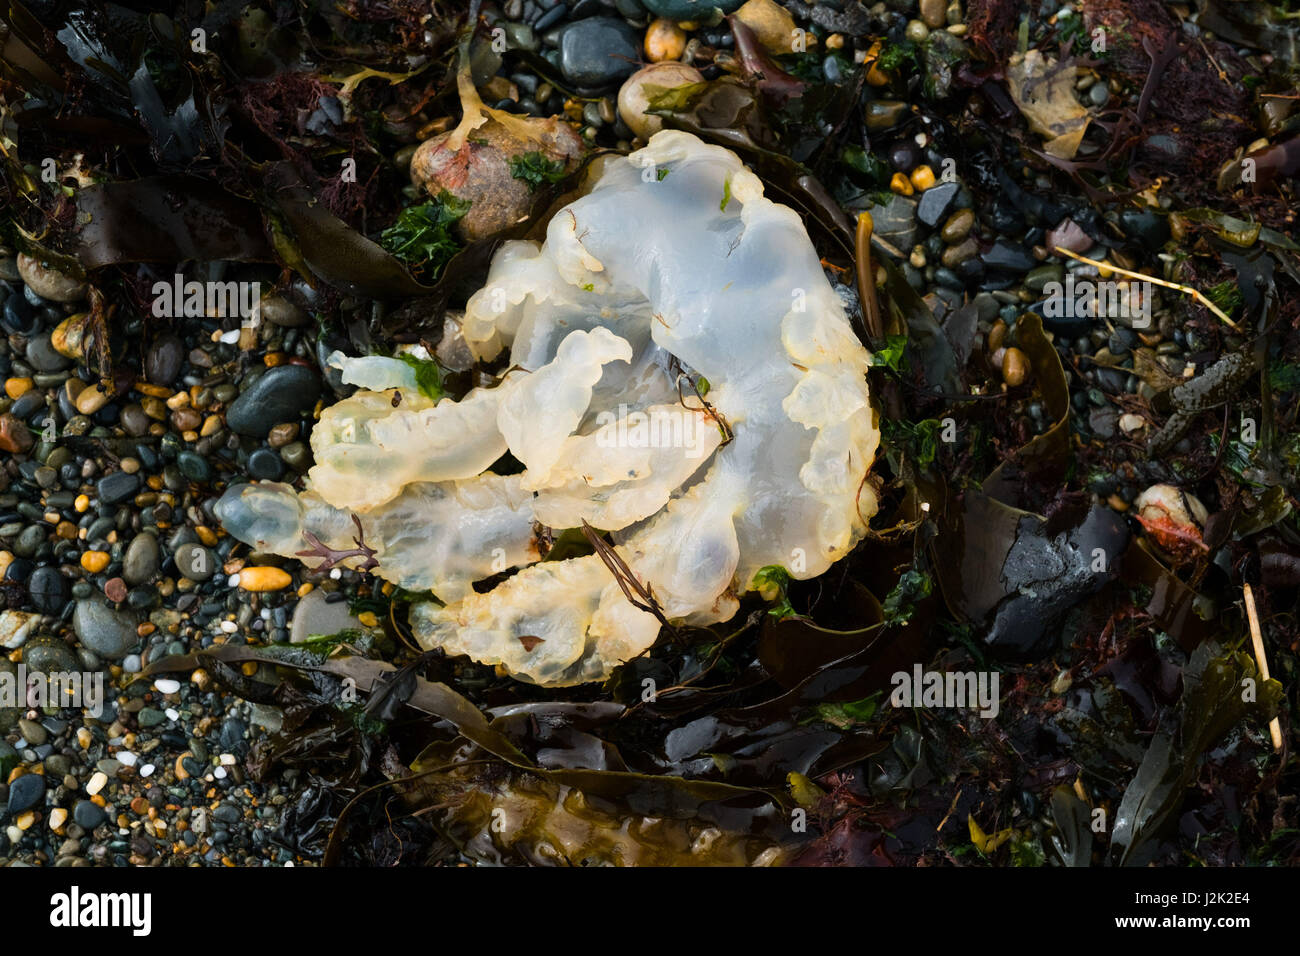 Aberystwyth Wales UK, Saturday 29 April 2017 UK weather - Hundreds of jellyfish washed up on the beach at high tide on a bright sunny but breezy morning at the seaside in Aberystwyth at the start of the Mayday Bank Holiday weekend photo Credit: keith morris/Alamy Live News Stock Photo